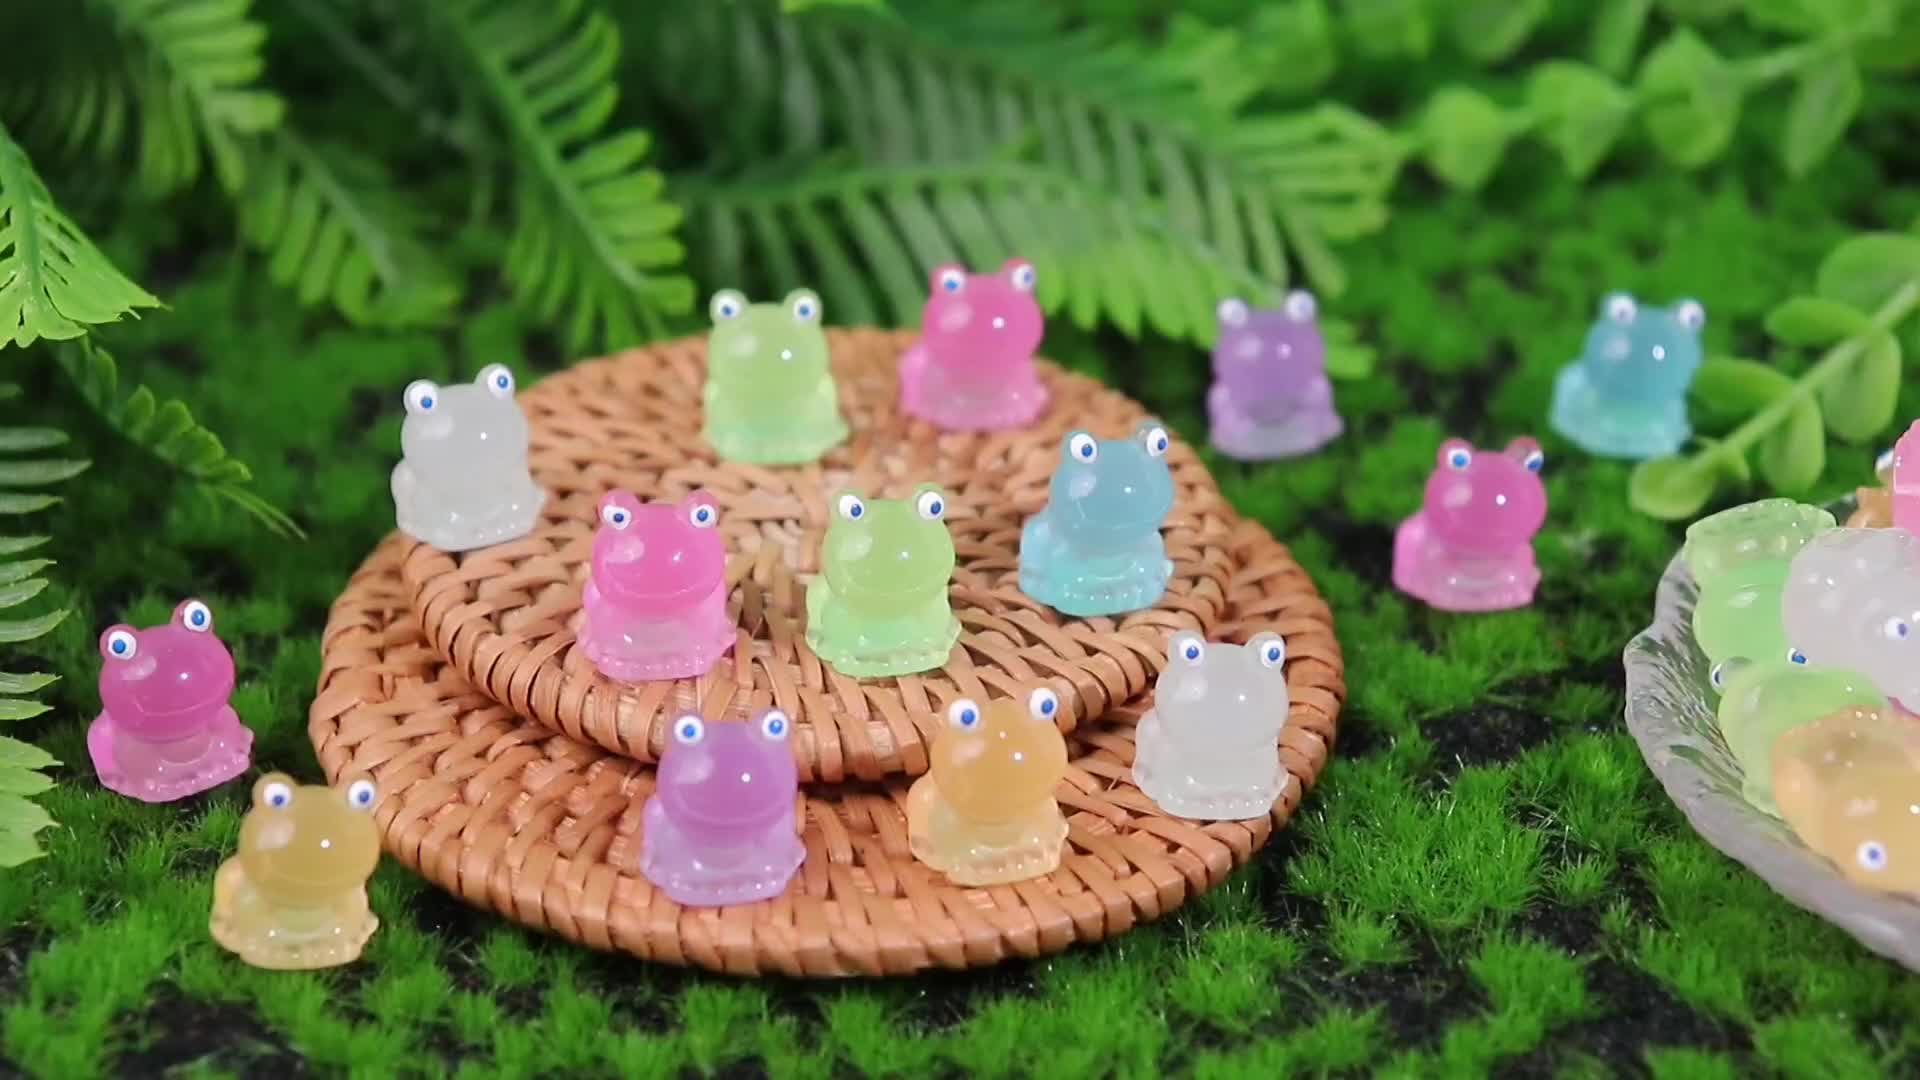 Glow in the Dark Frog Figurines - 7/14/21Pcs Luminous Resin Mini Frogs for  Garden Dollhouse Decoration Crafts